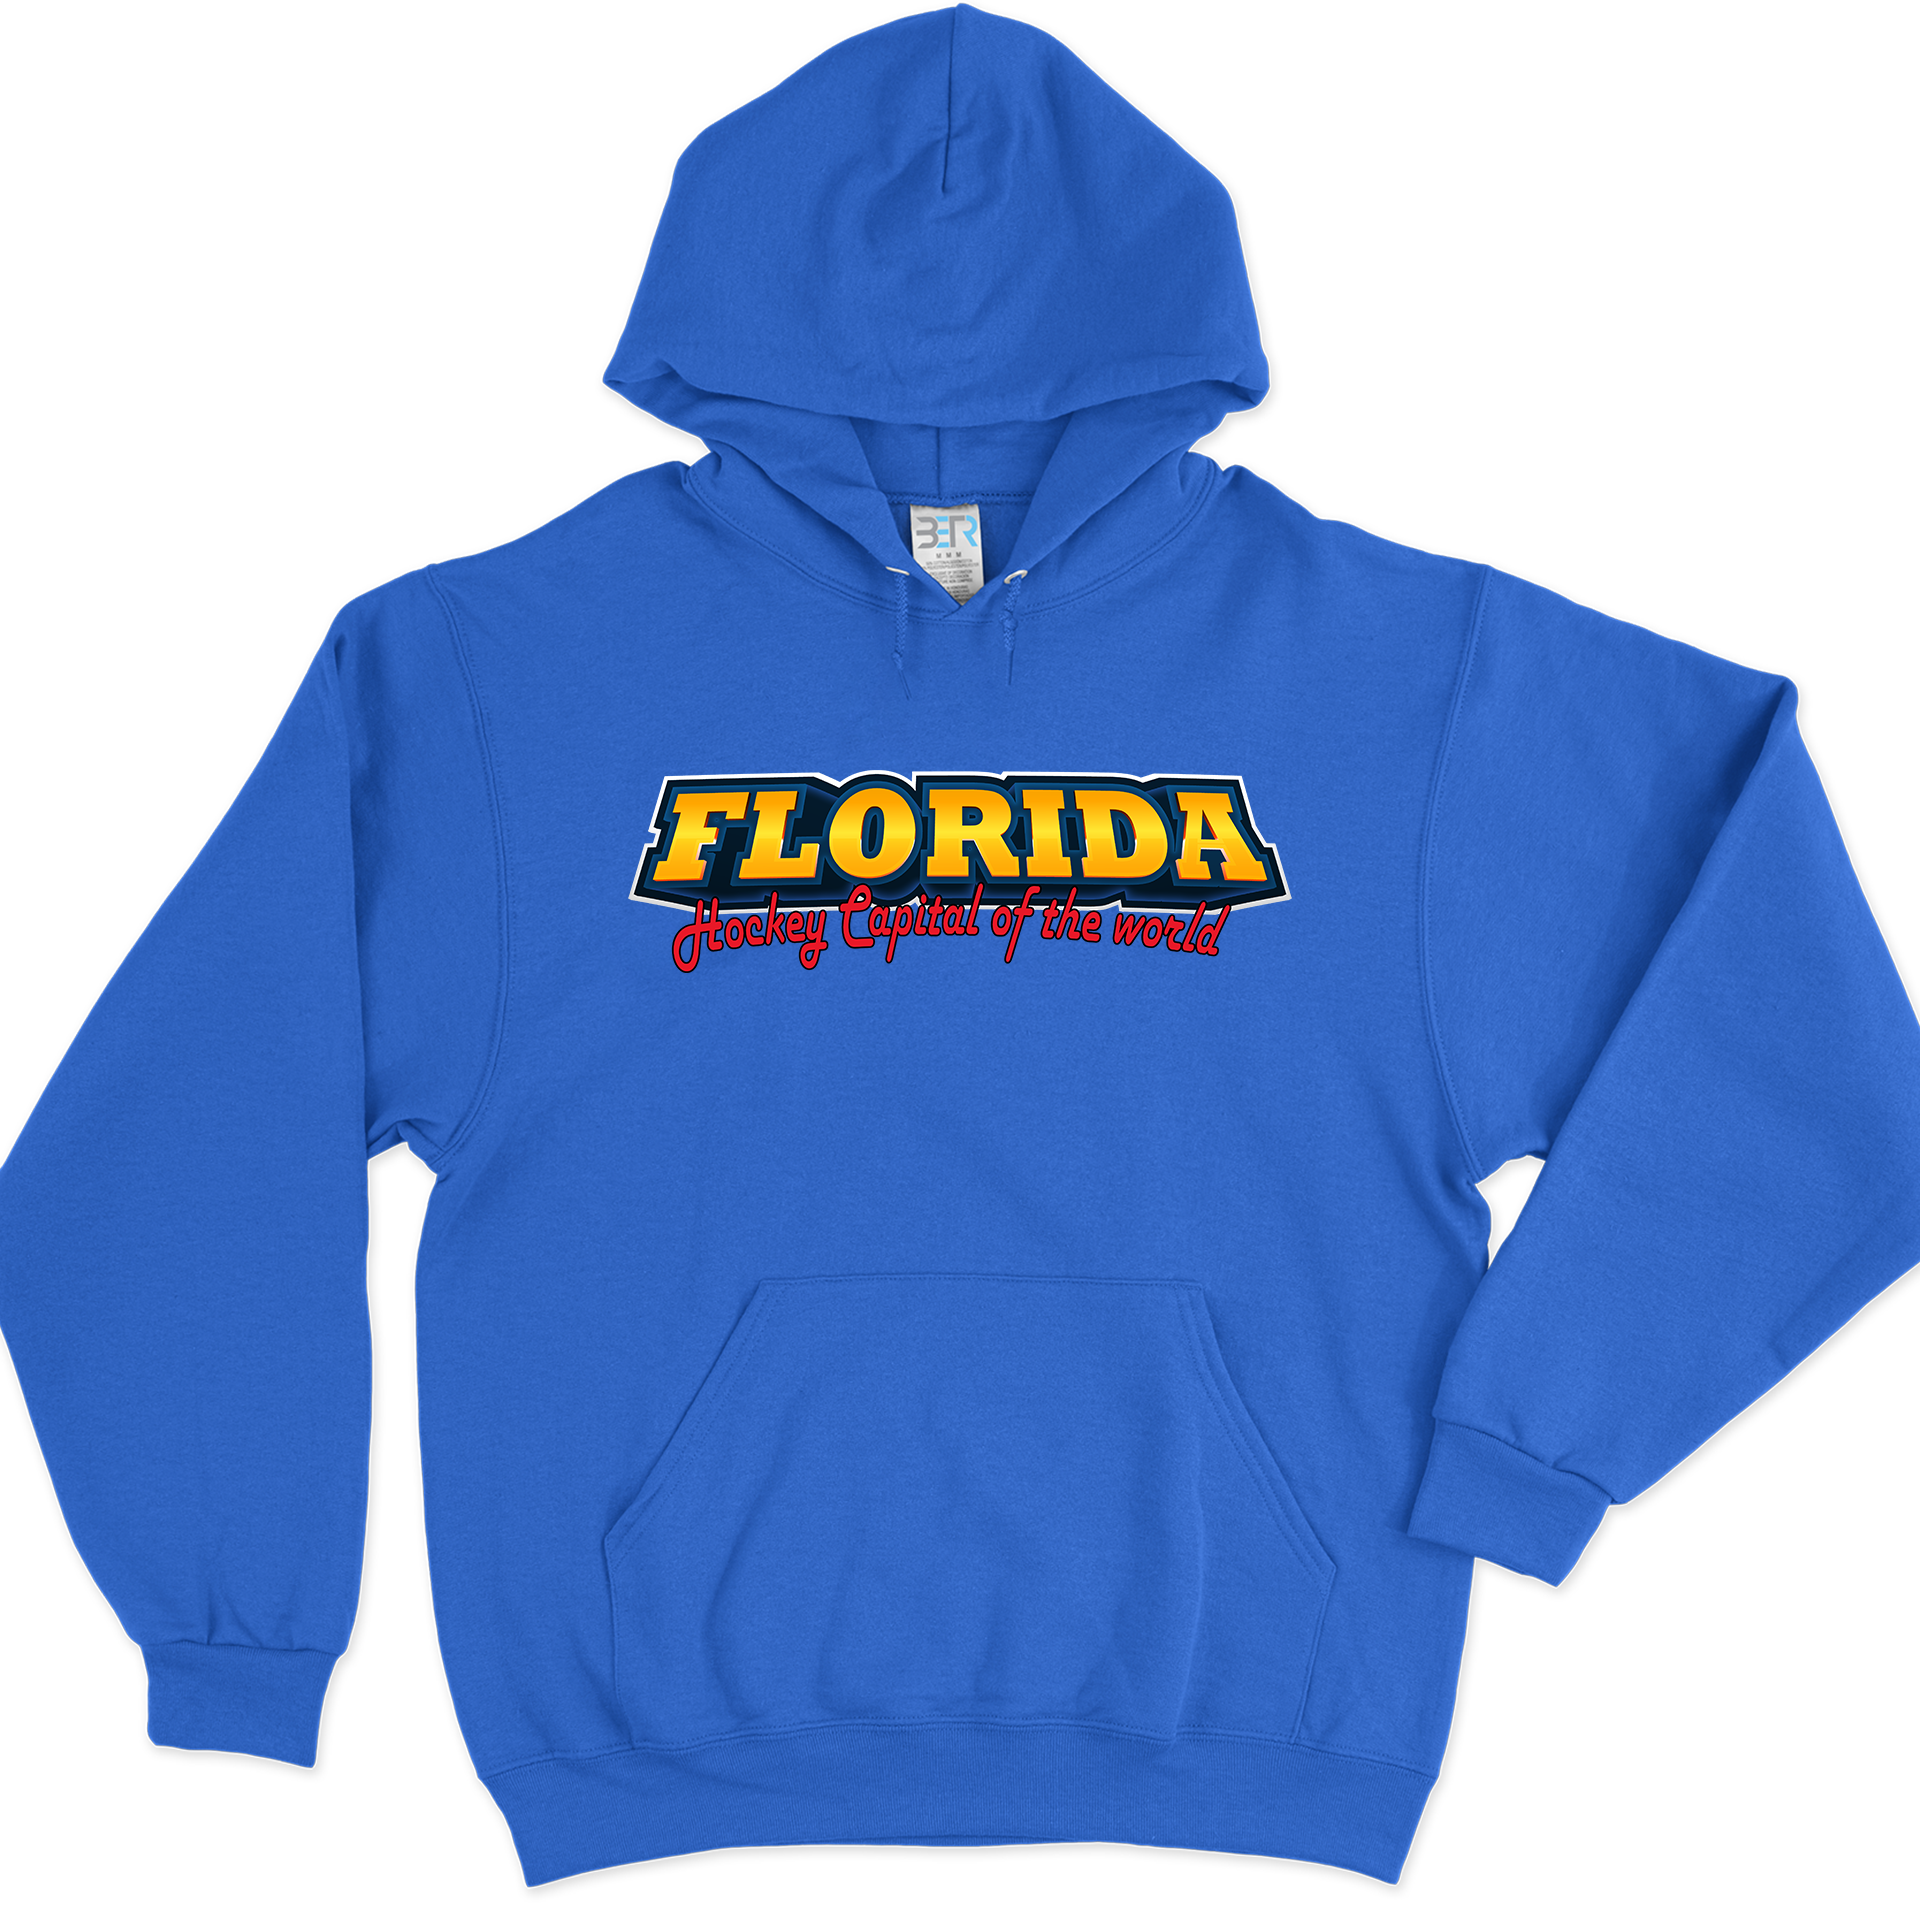 NHL You laugh I Laugh You Cry I Cry – Florida Panthers Hoodie Sweatshirt 3D  Custom Name For Fans - Freedomdesign